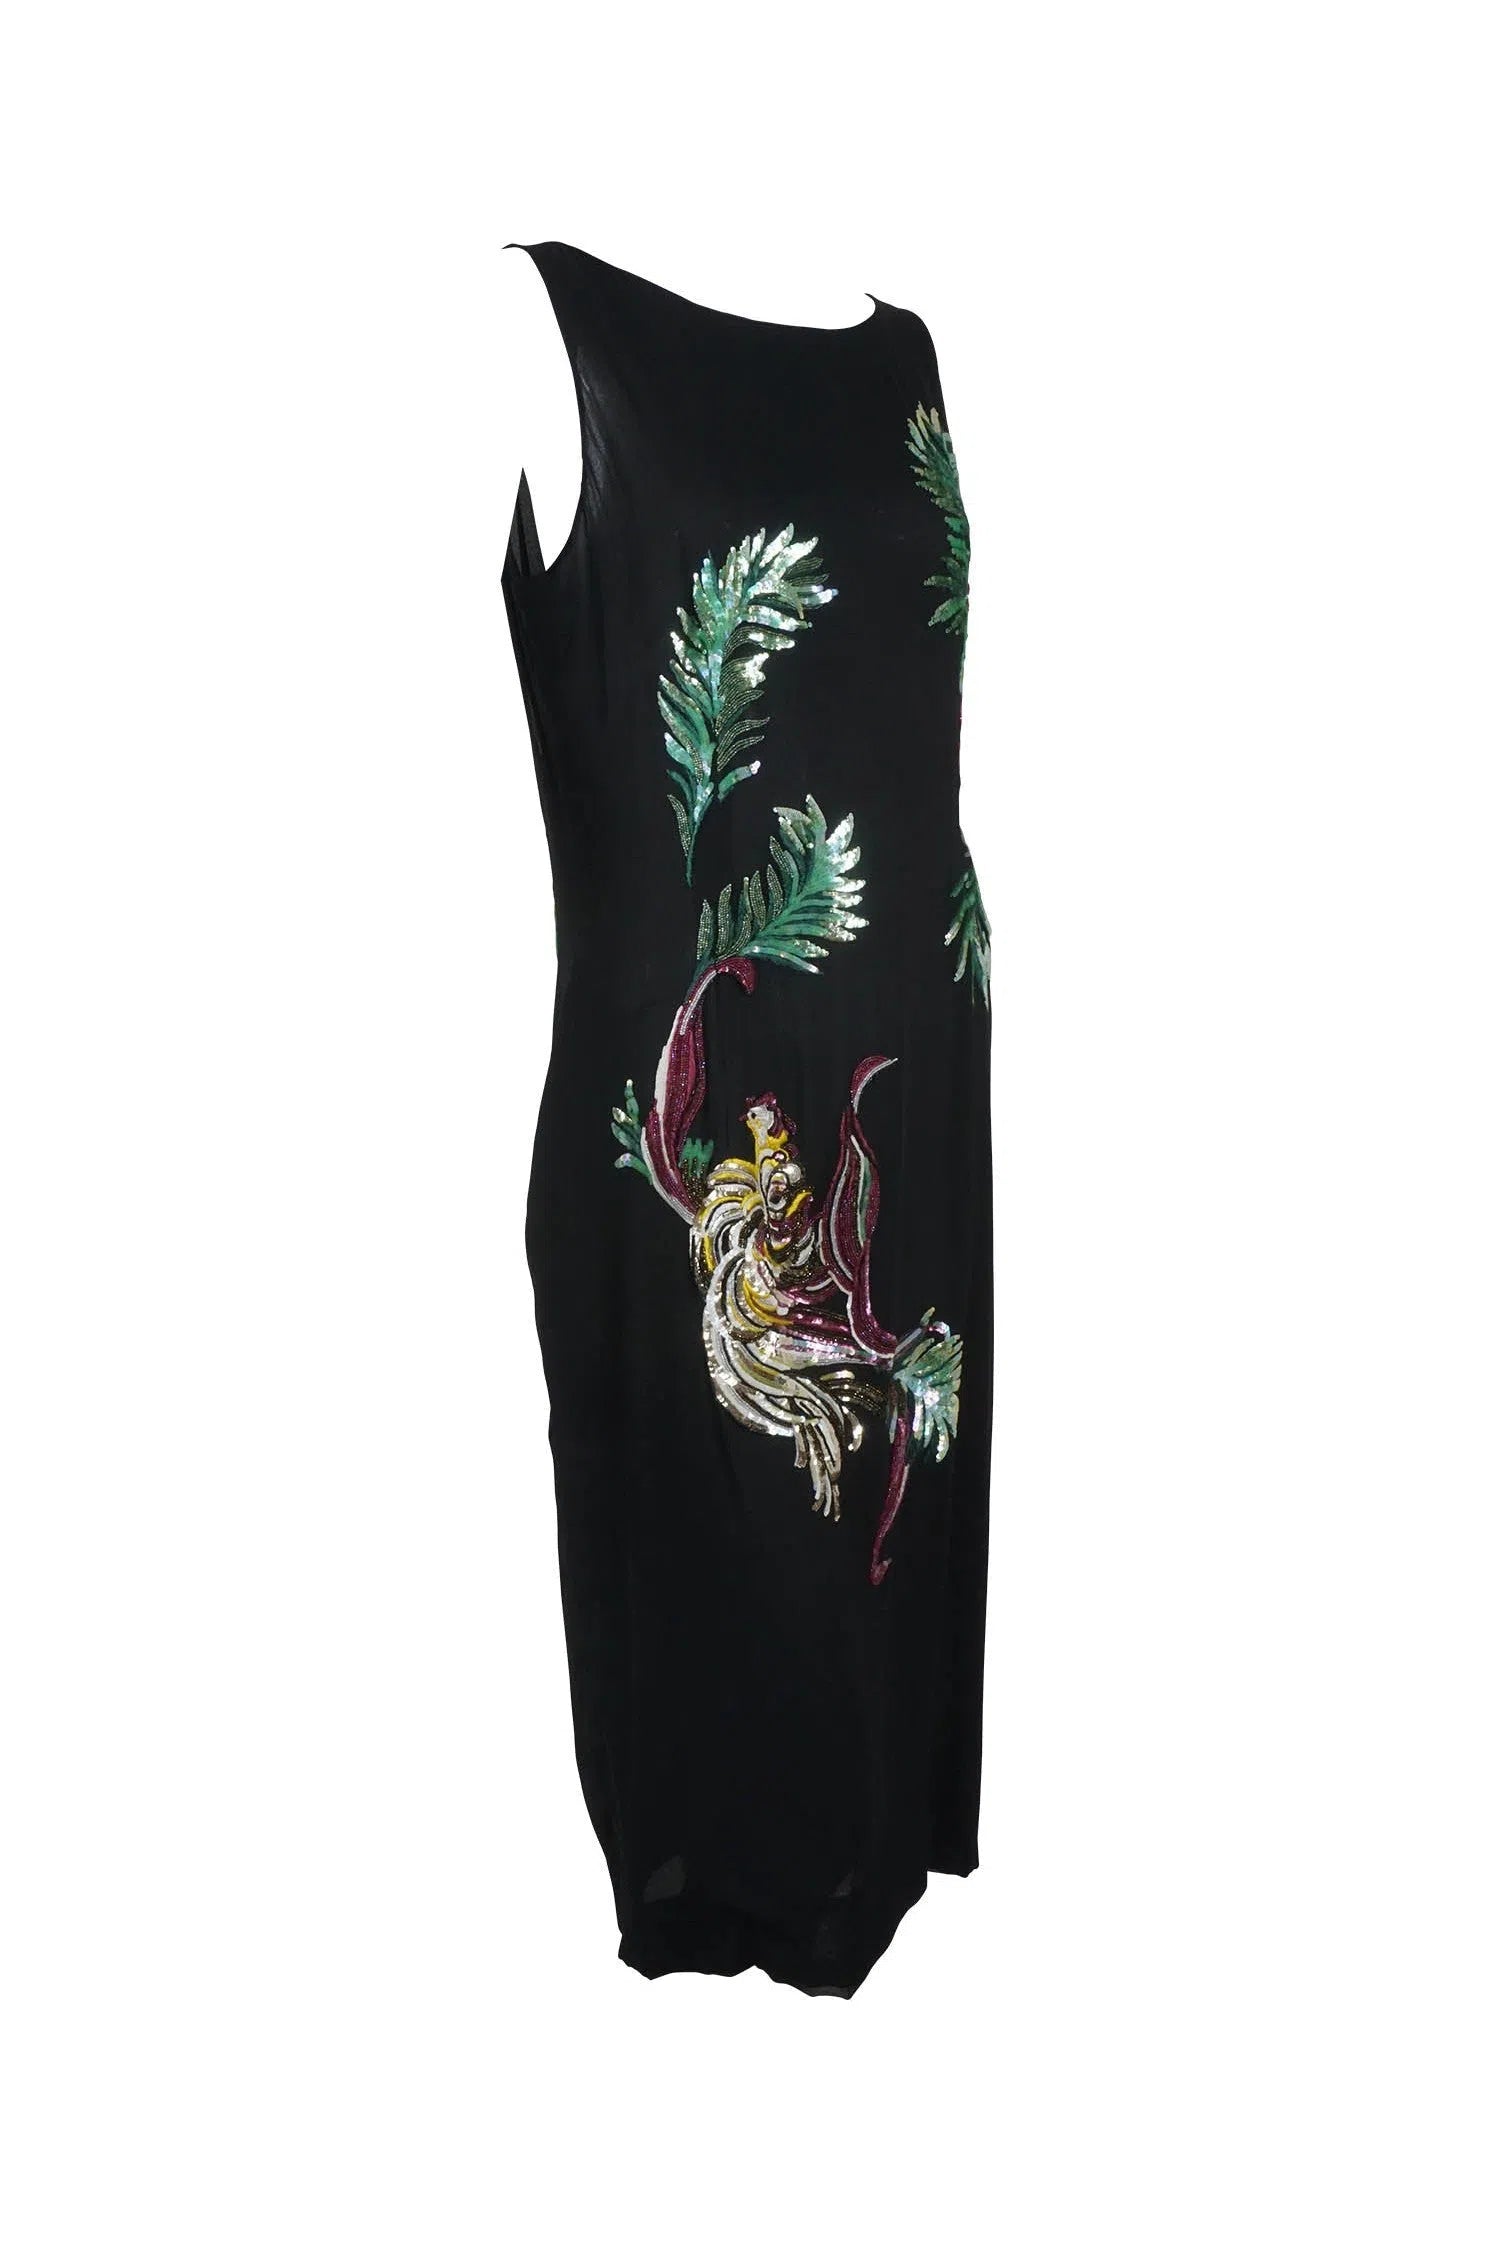 Givenchy Couture by Alexander McQueen Vintage 1997 Sequin Embroidered Bird Dress - Foxy Couture Carmel